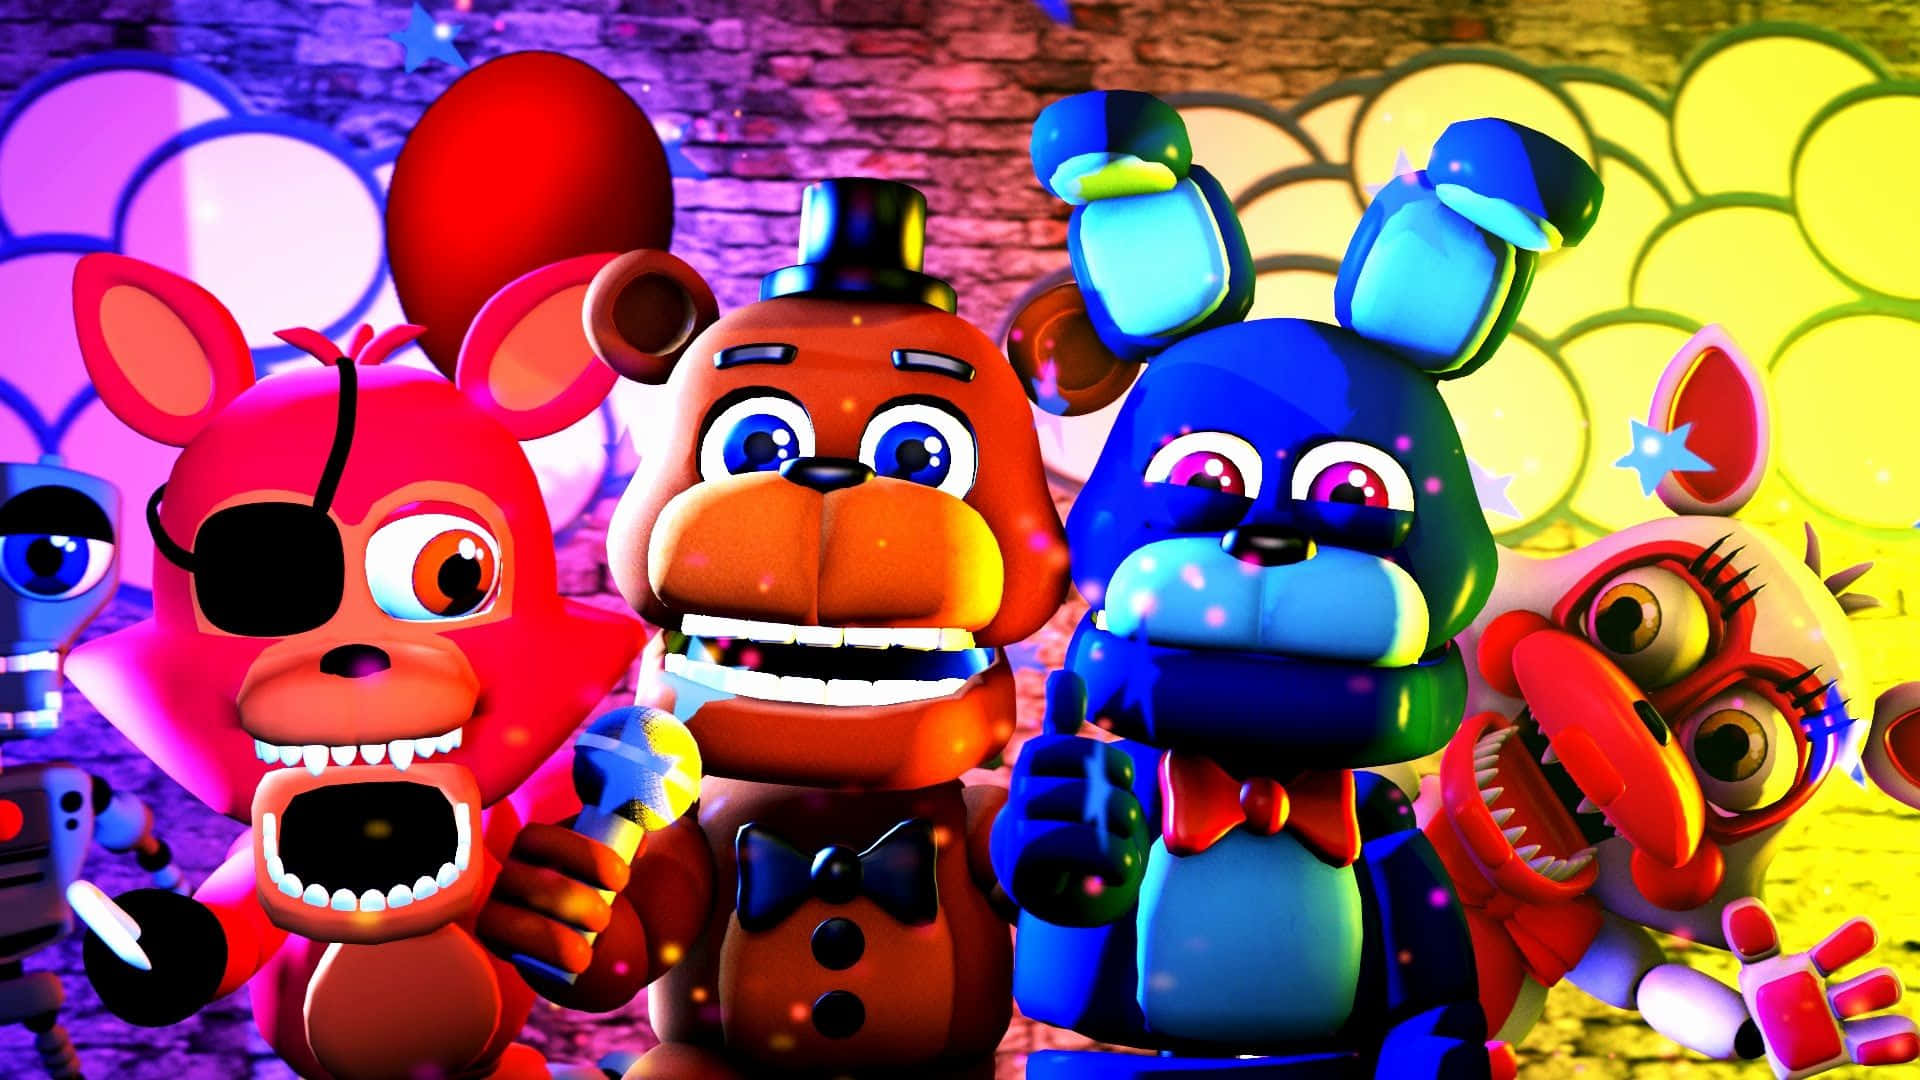 Bring The Fun Into Five Night's At Freddy's With These Cute Fnaf Characters!